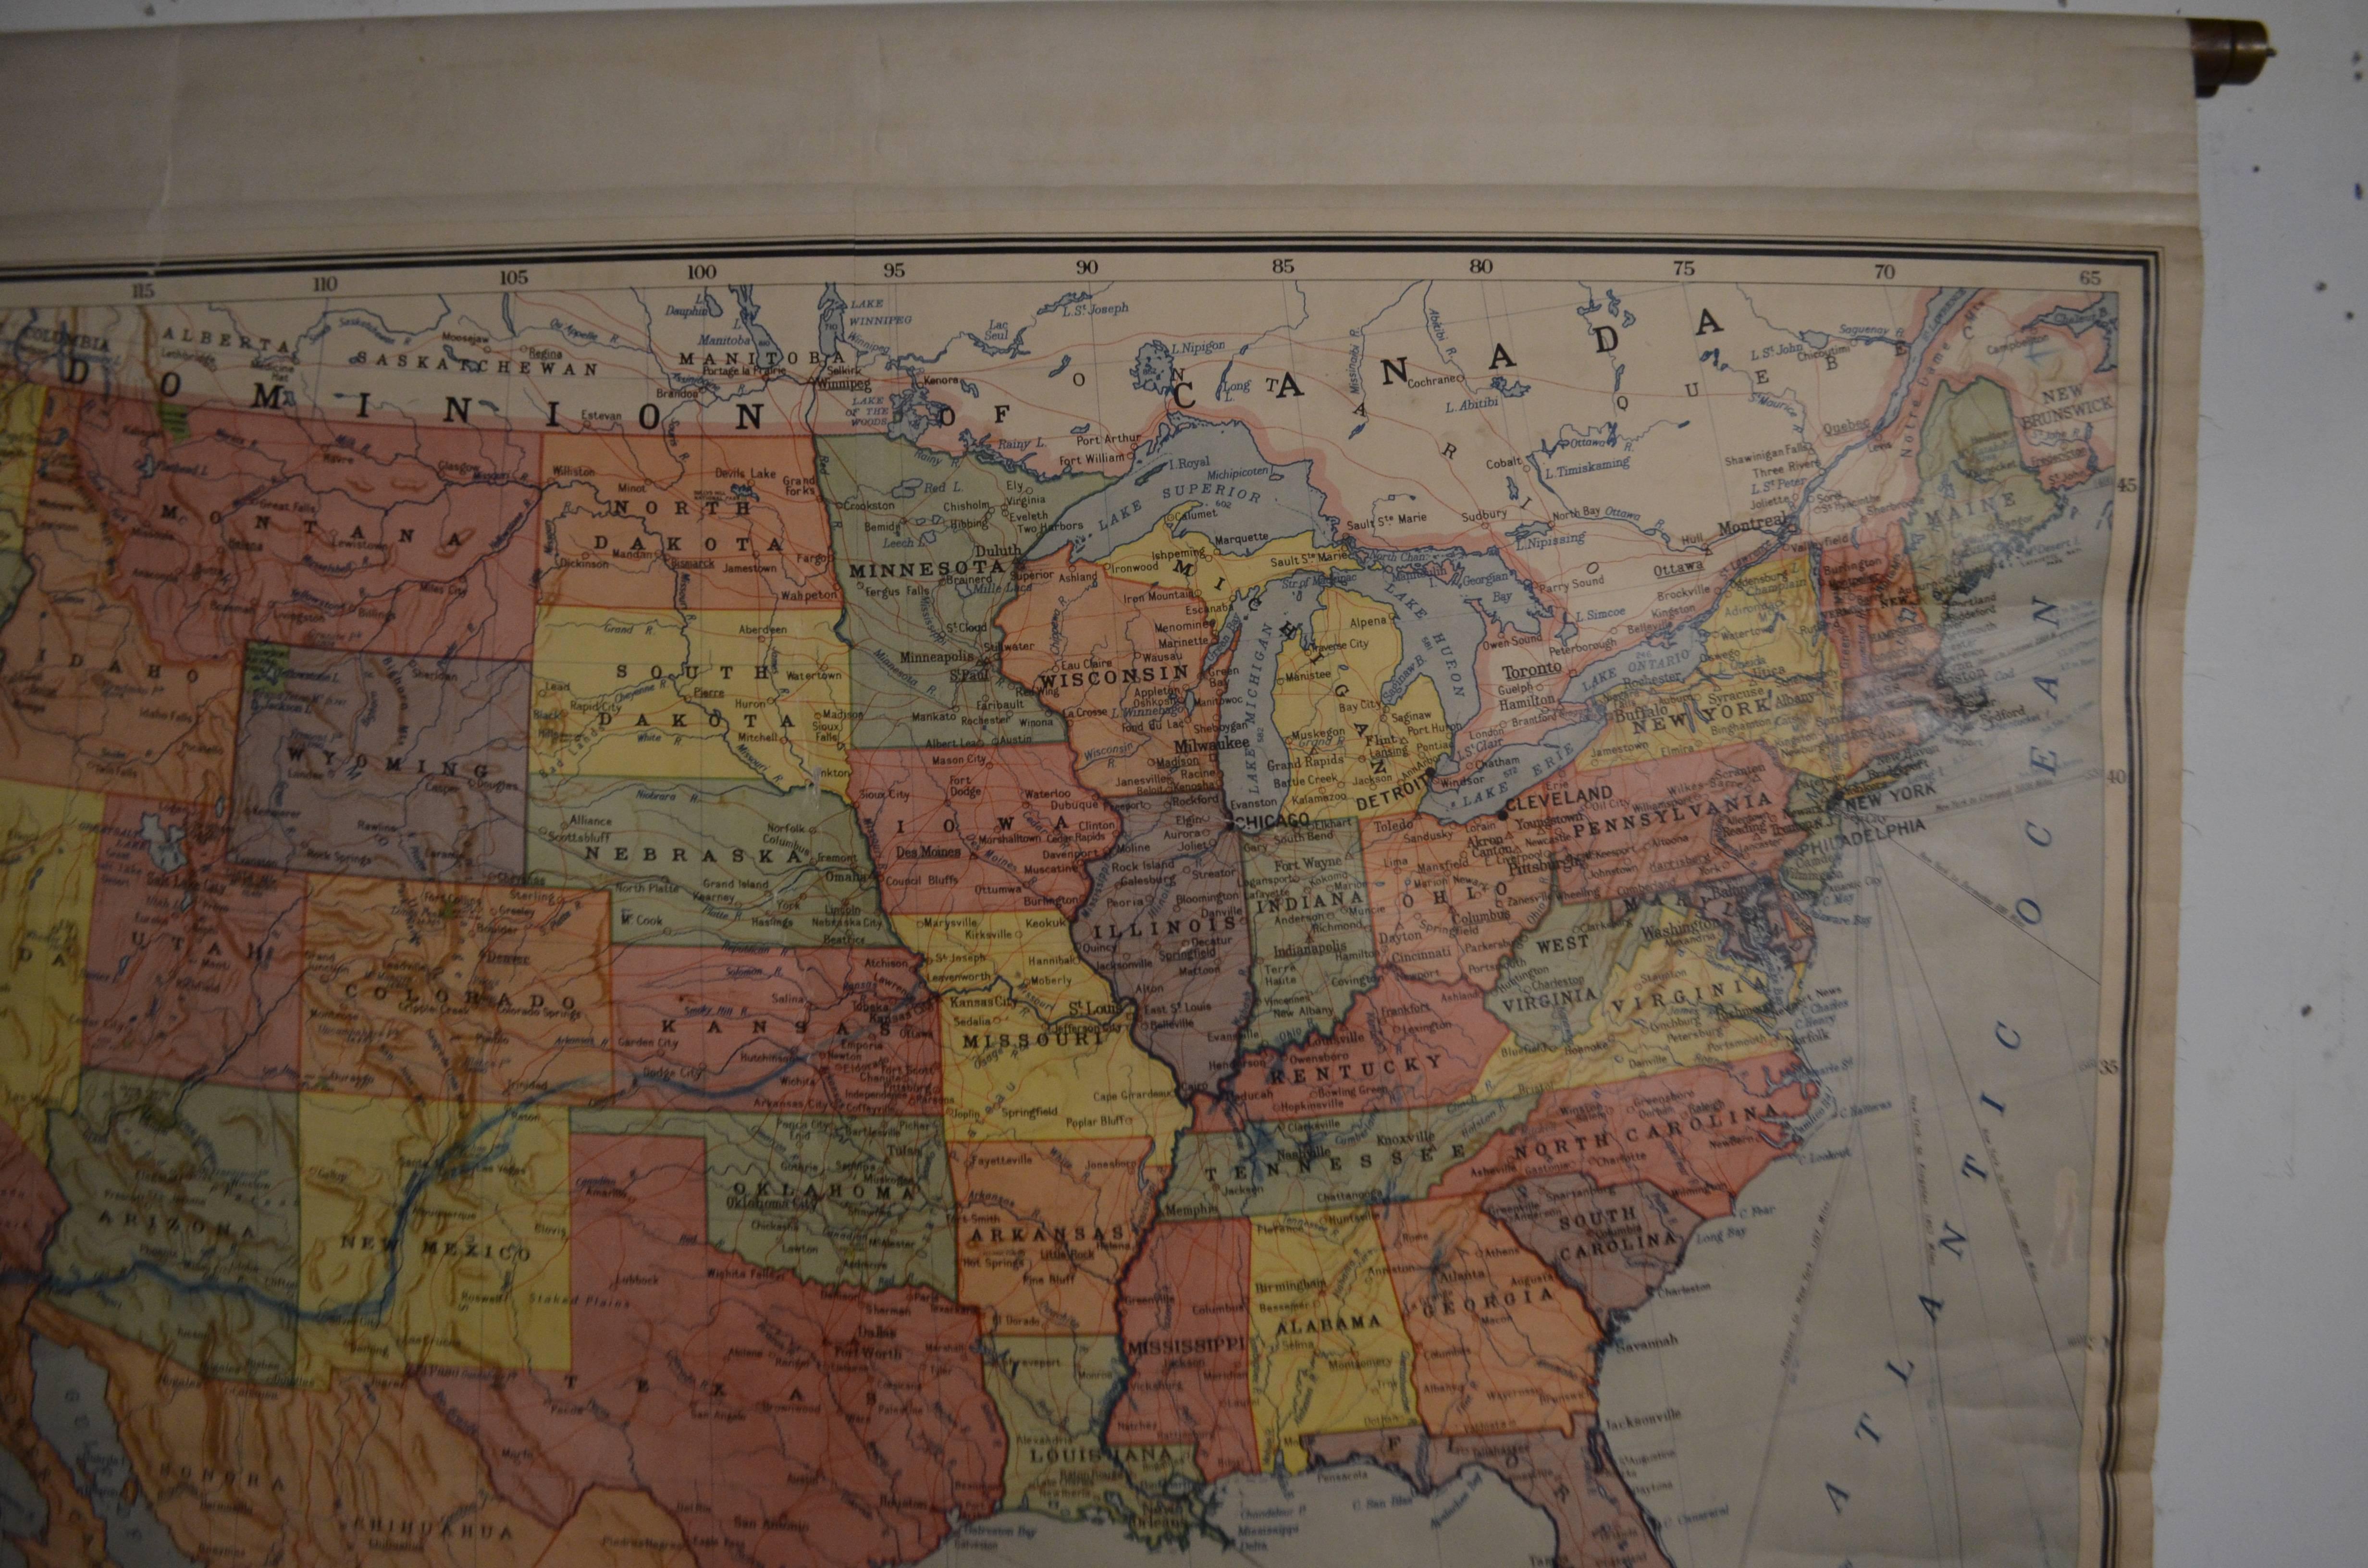 Paper Map of the United States, Engraved and Printed in Scotland, circa 1930s